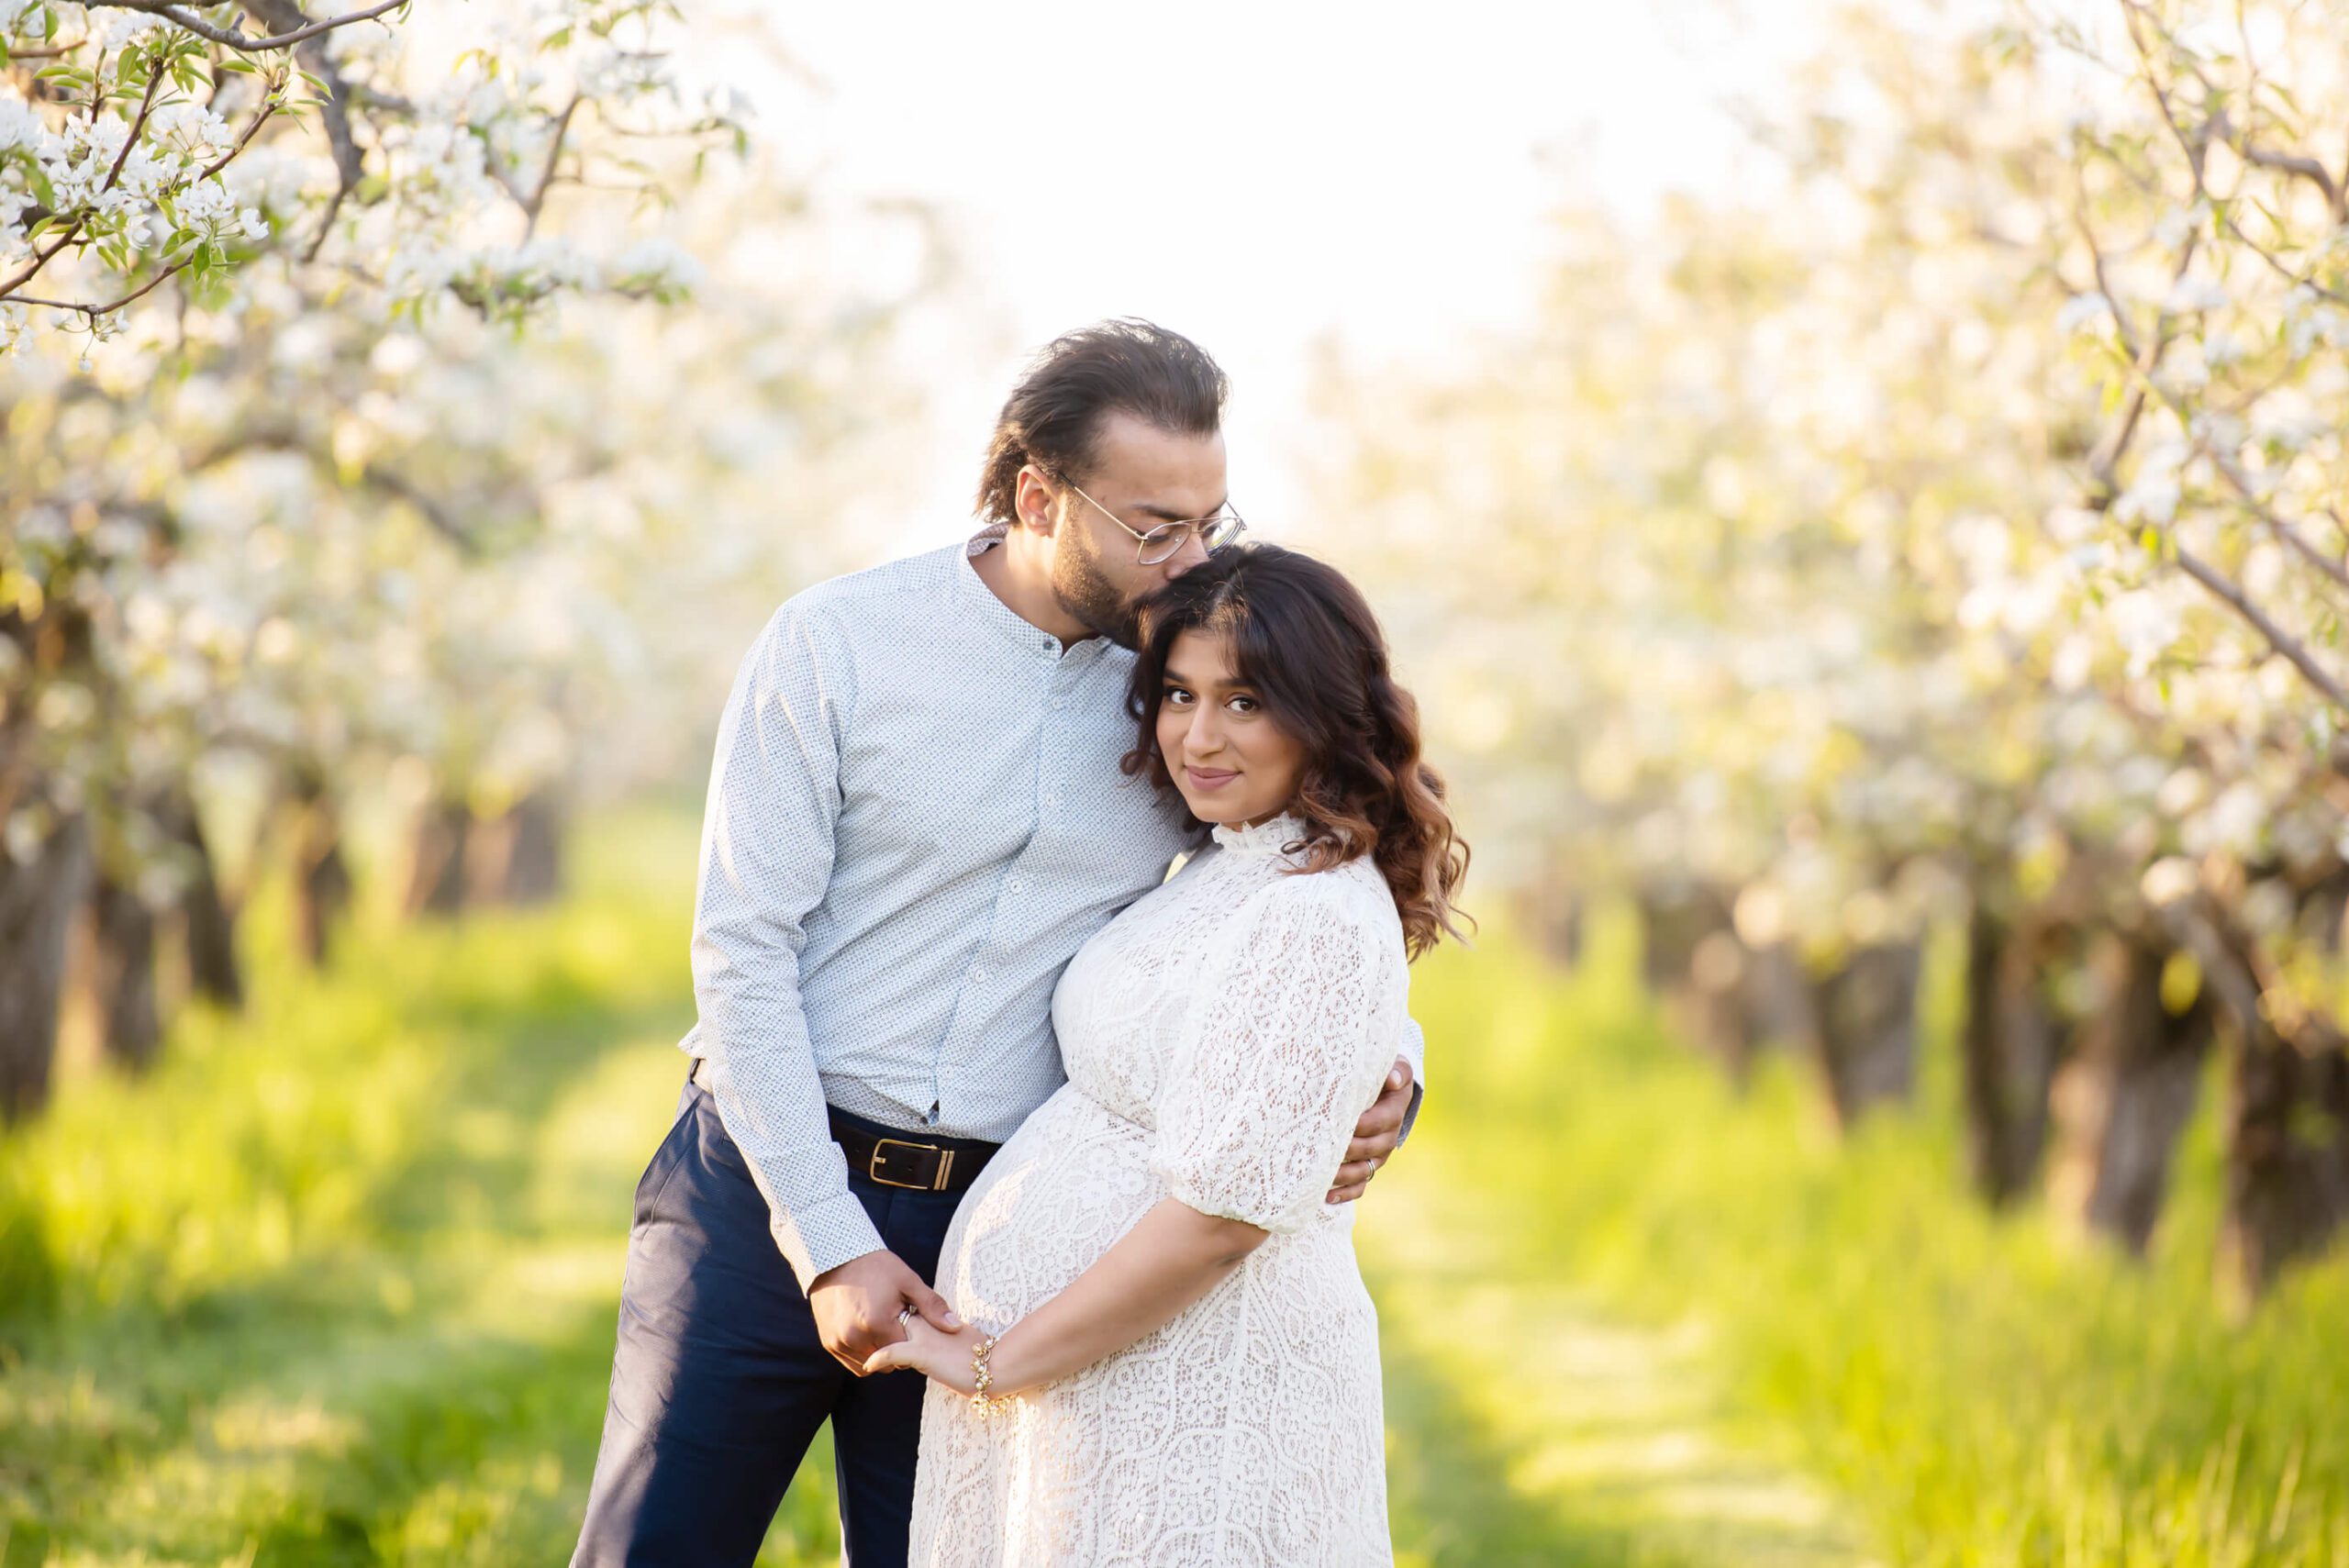 maternity photography session in the golden hour at the cherry blossom farm